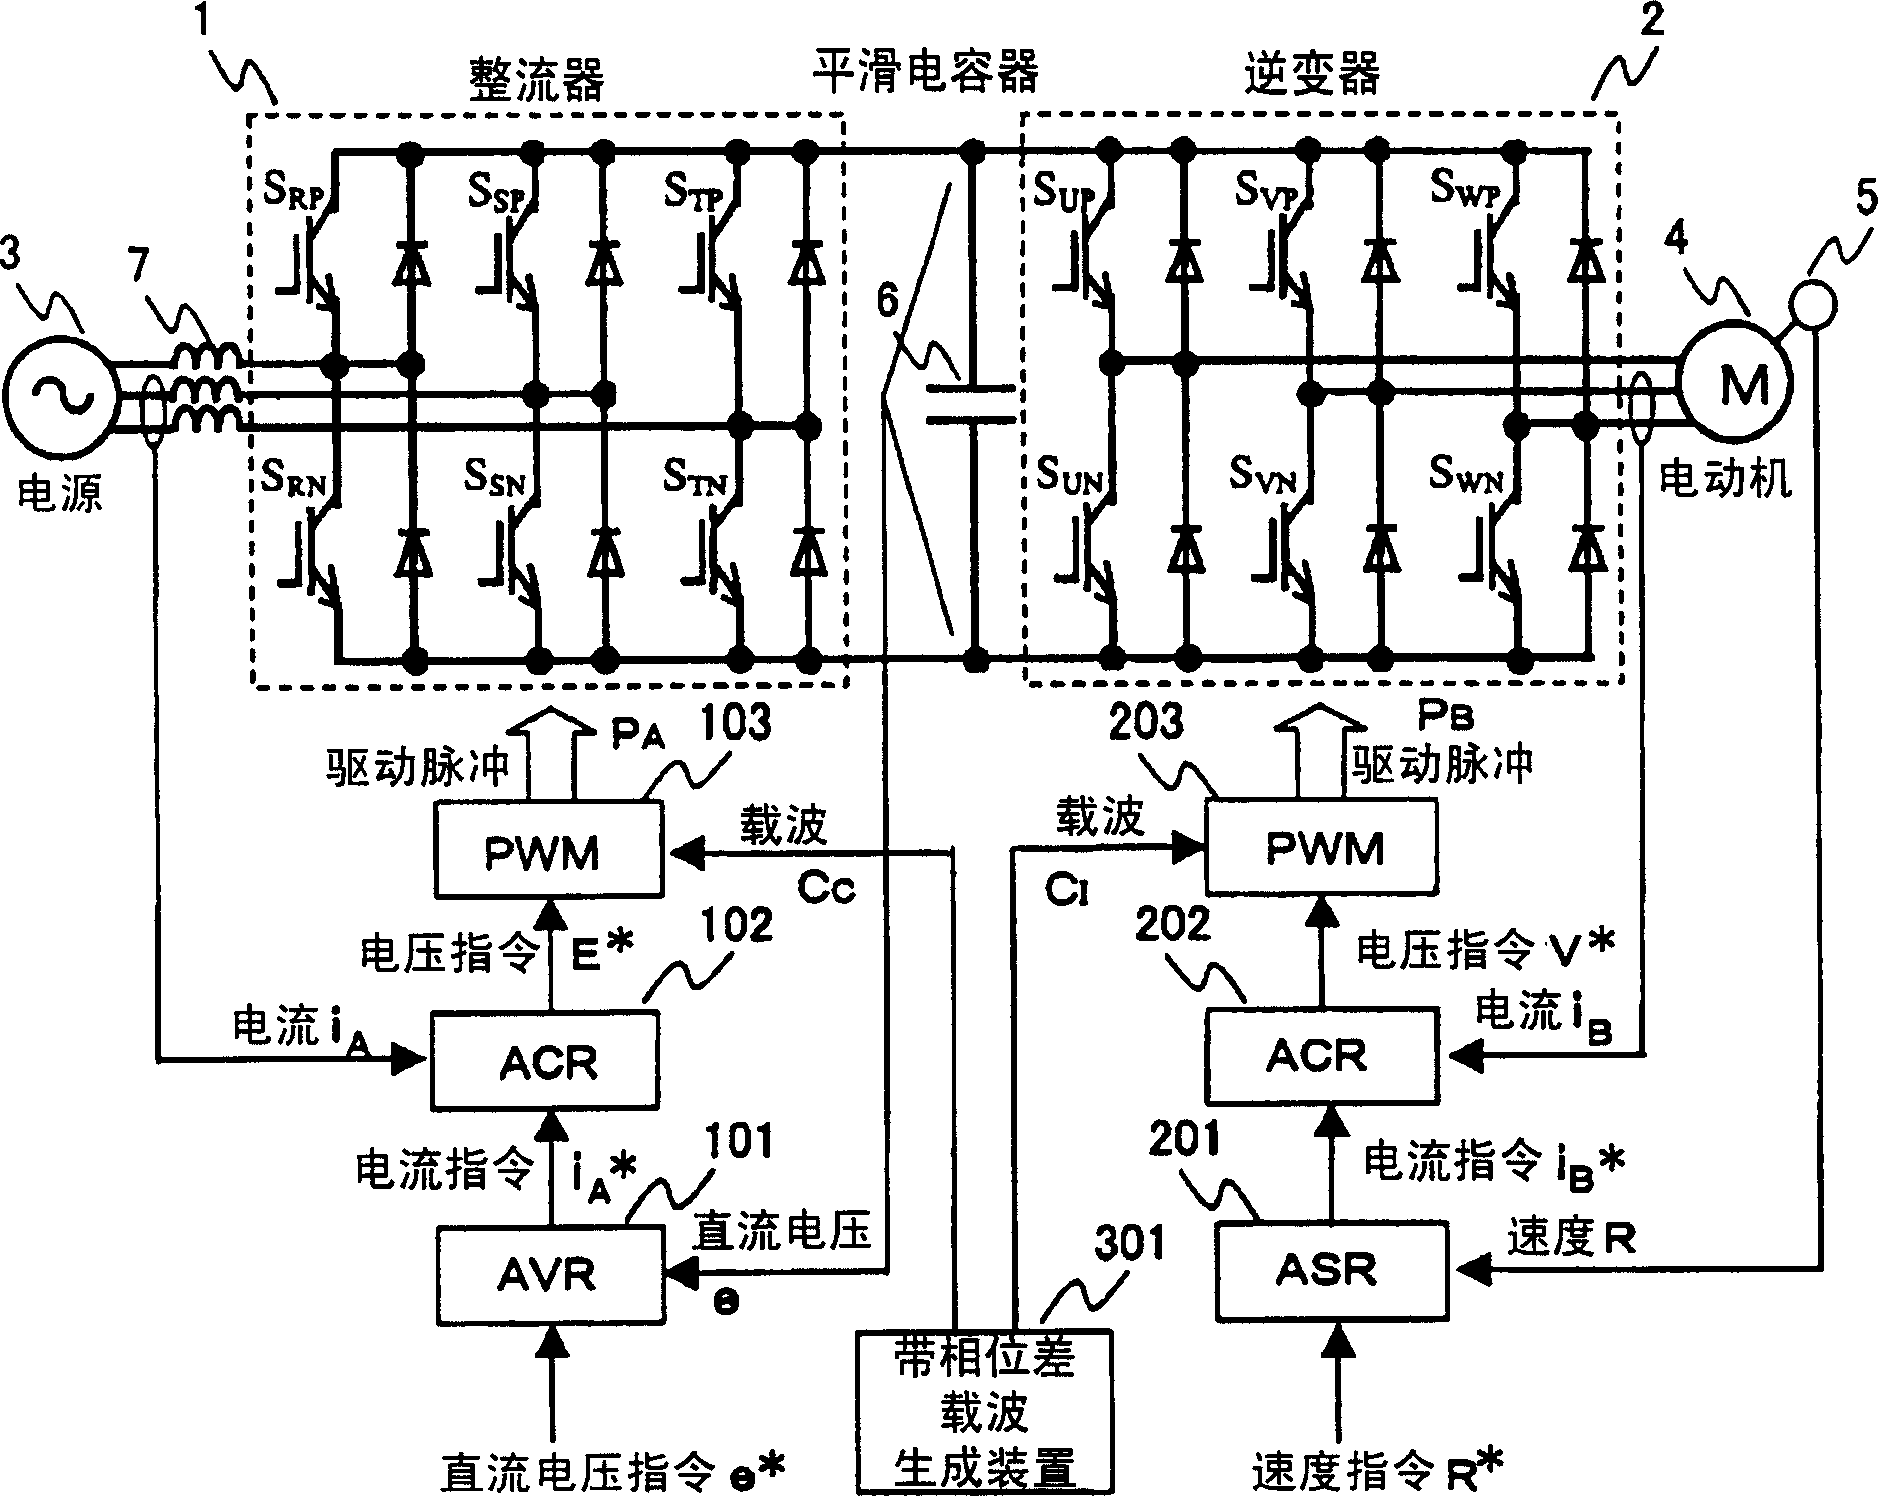 Power conversion system